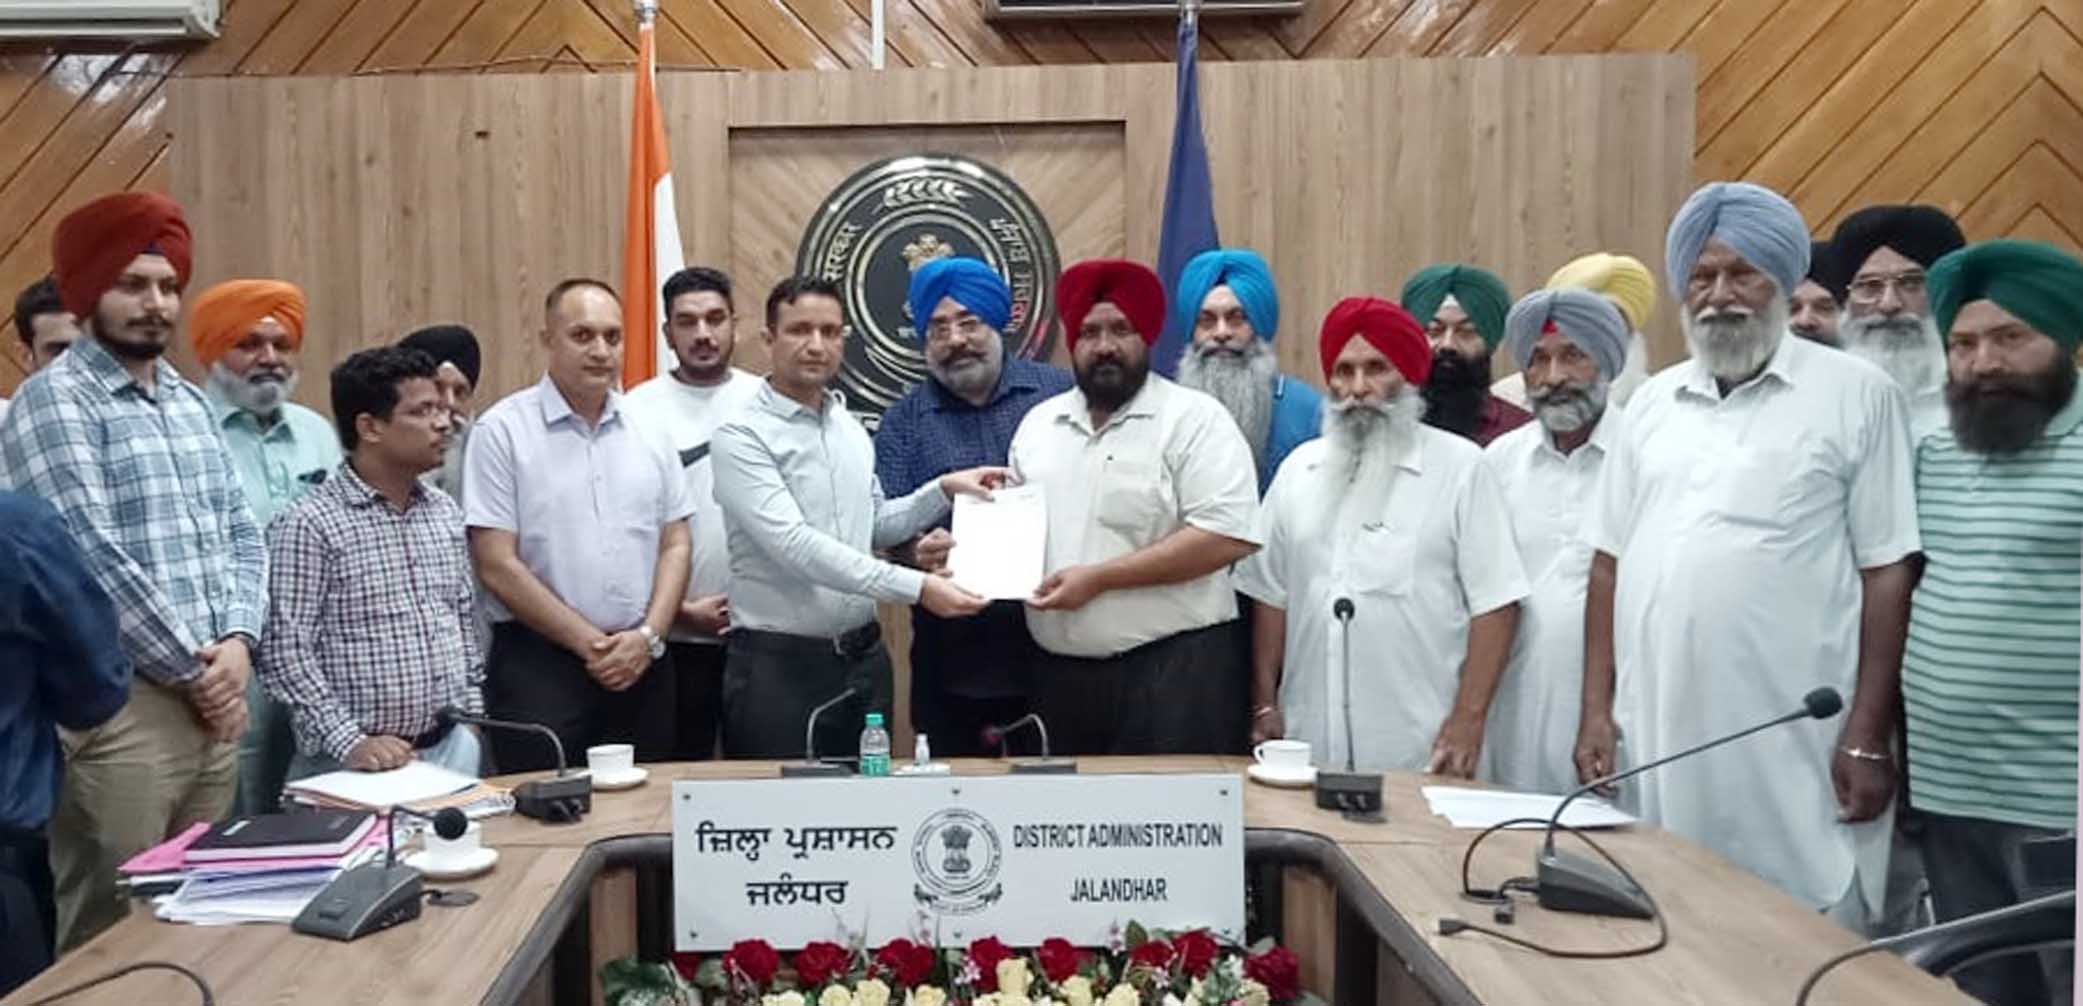 Jalandhar DC reaches out to farmers over land acquisition for NHs